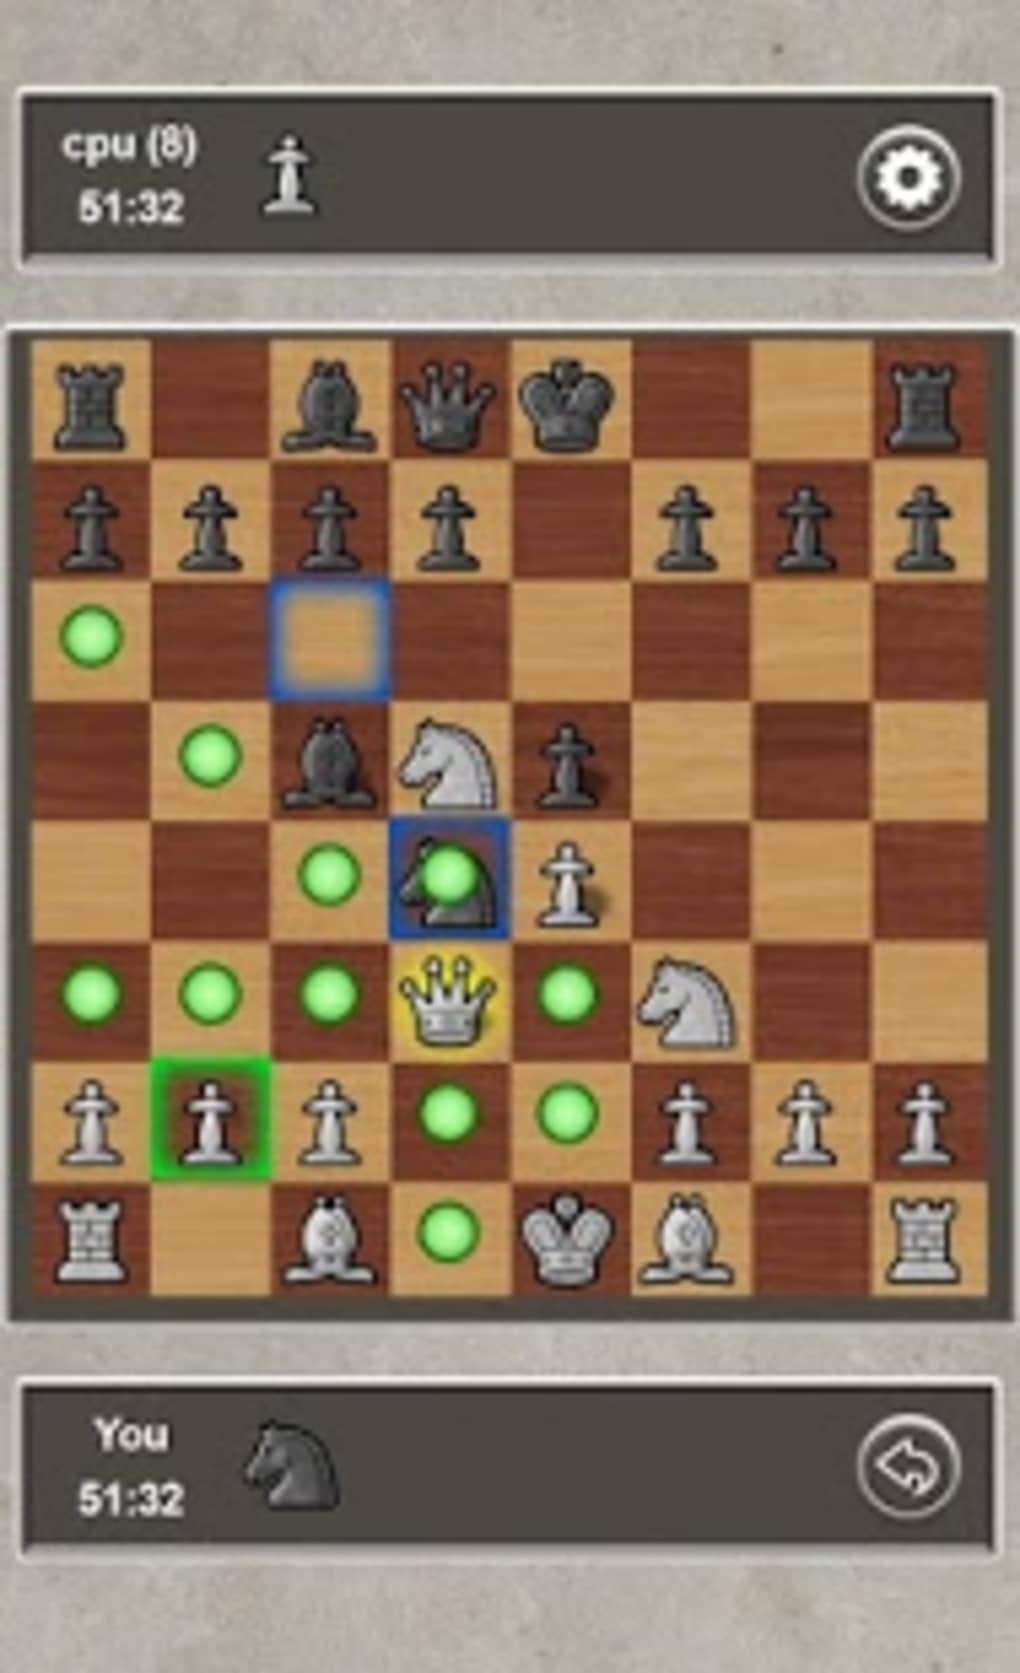 Free Download Chess Game Full Version For Android